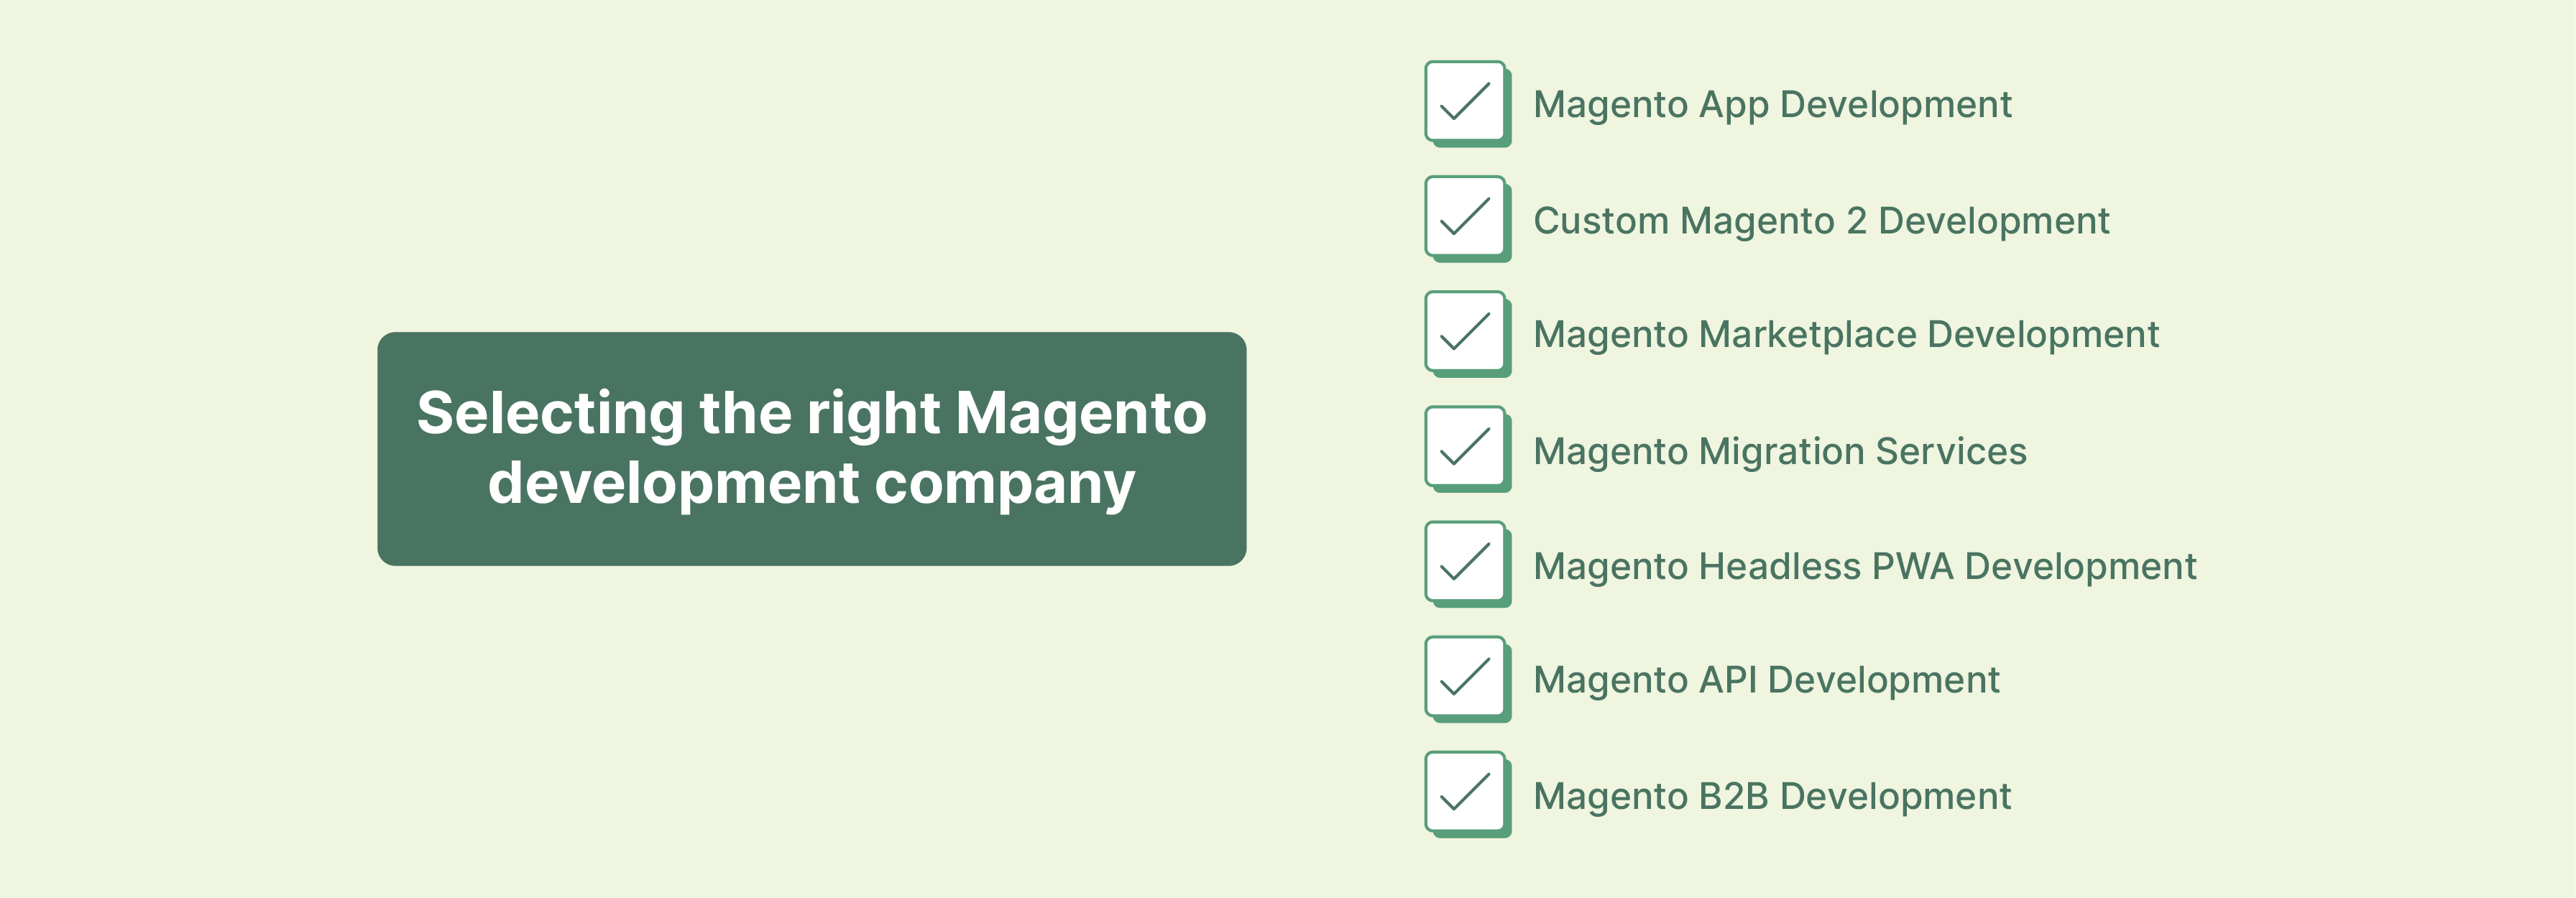 Guide on choosing an expert Magento development company for ecommerce